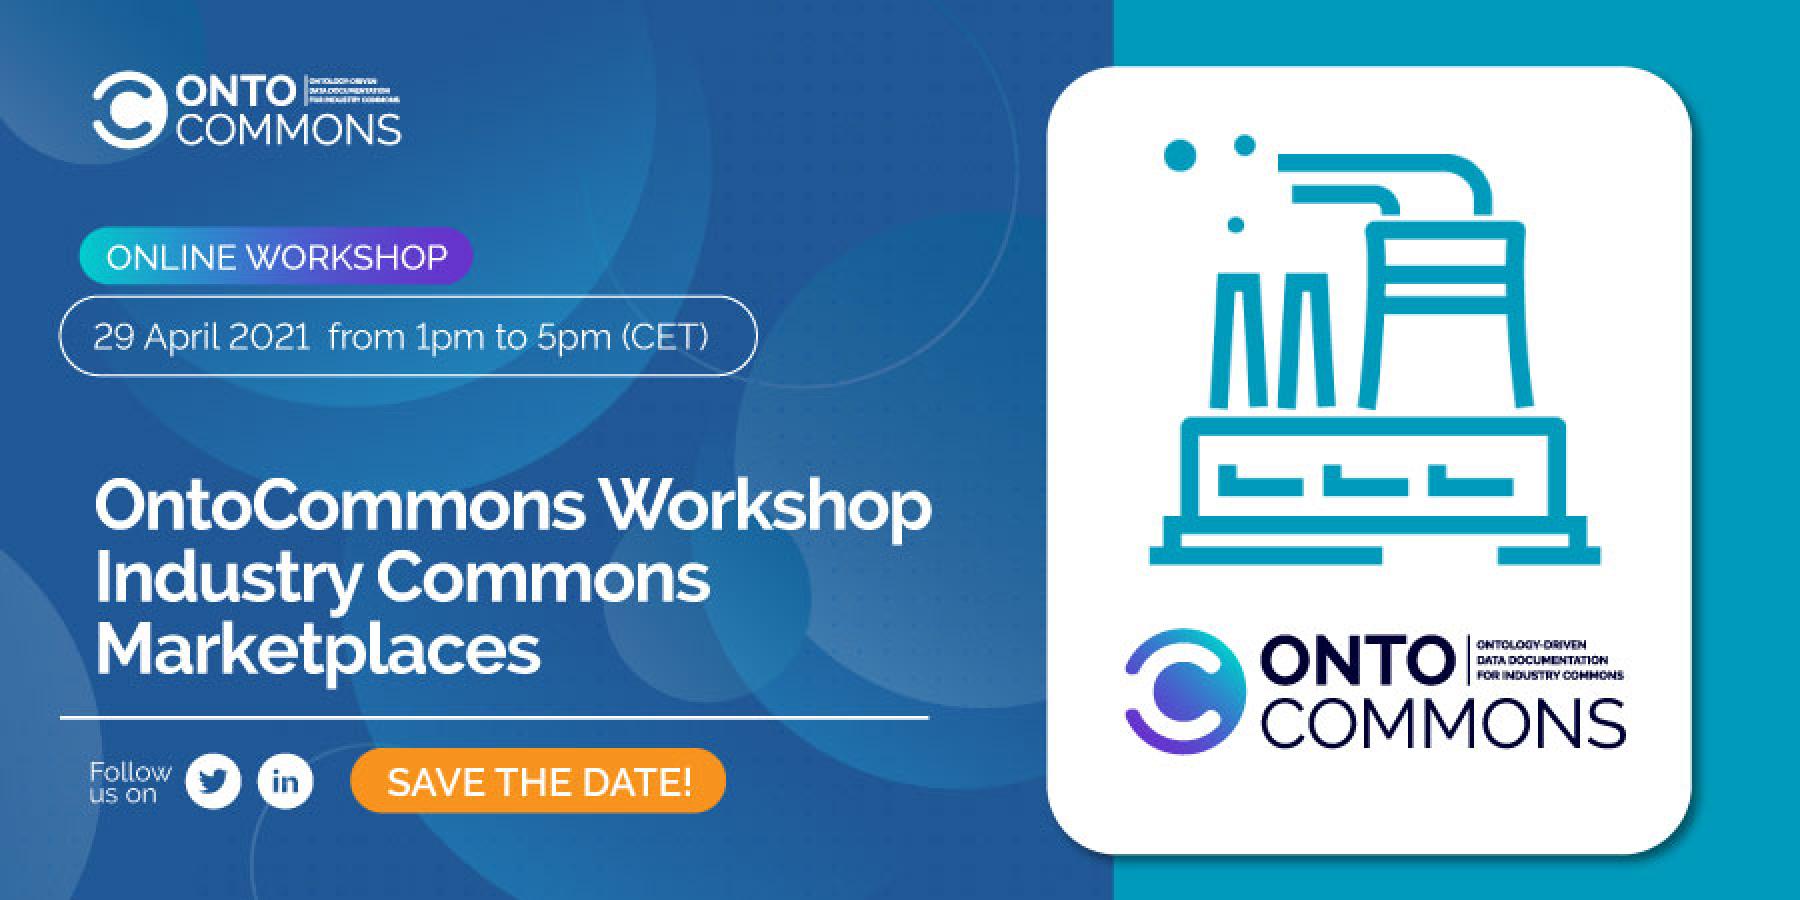 OntoCommons workshop - Industry Commons Marketplaces